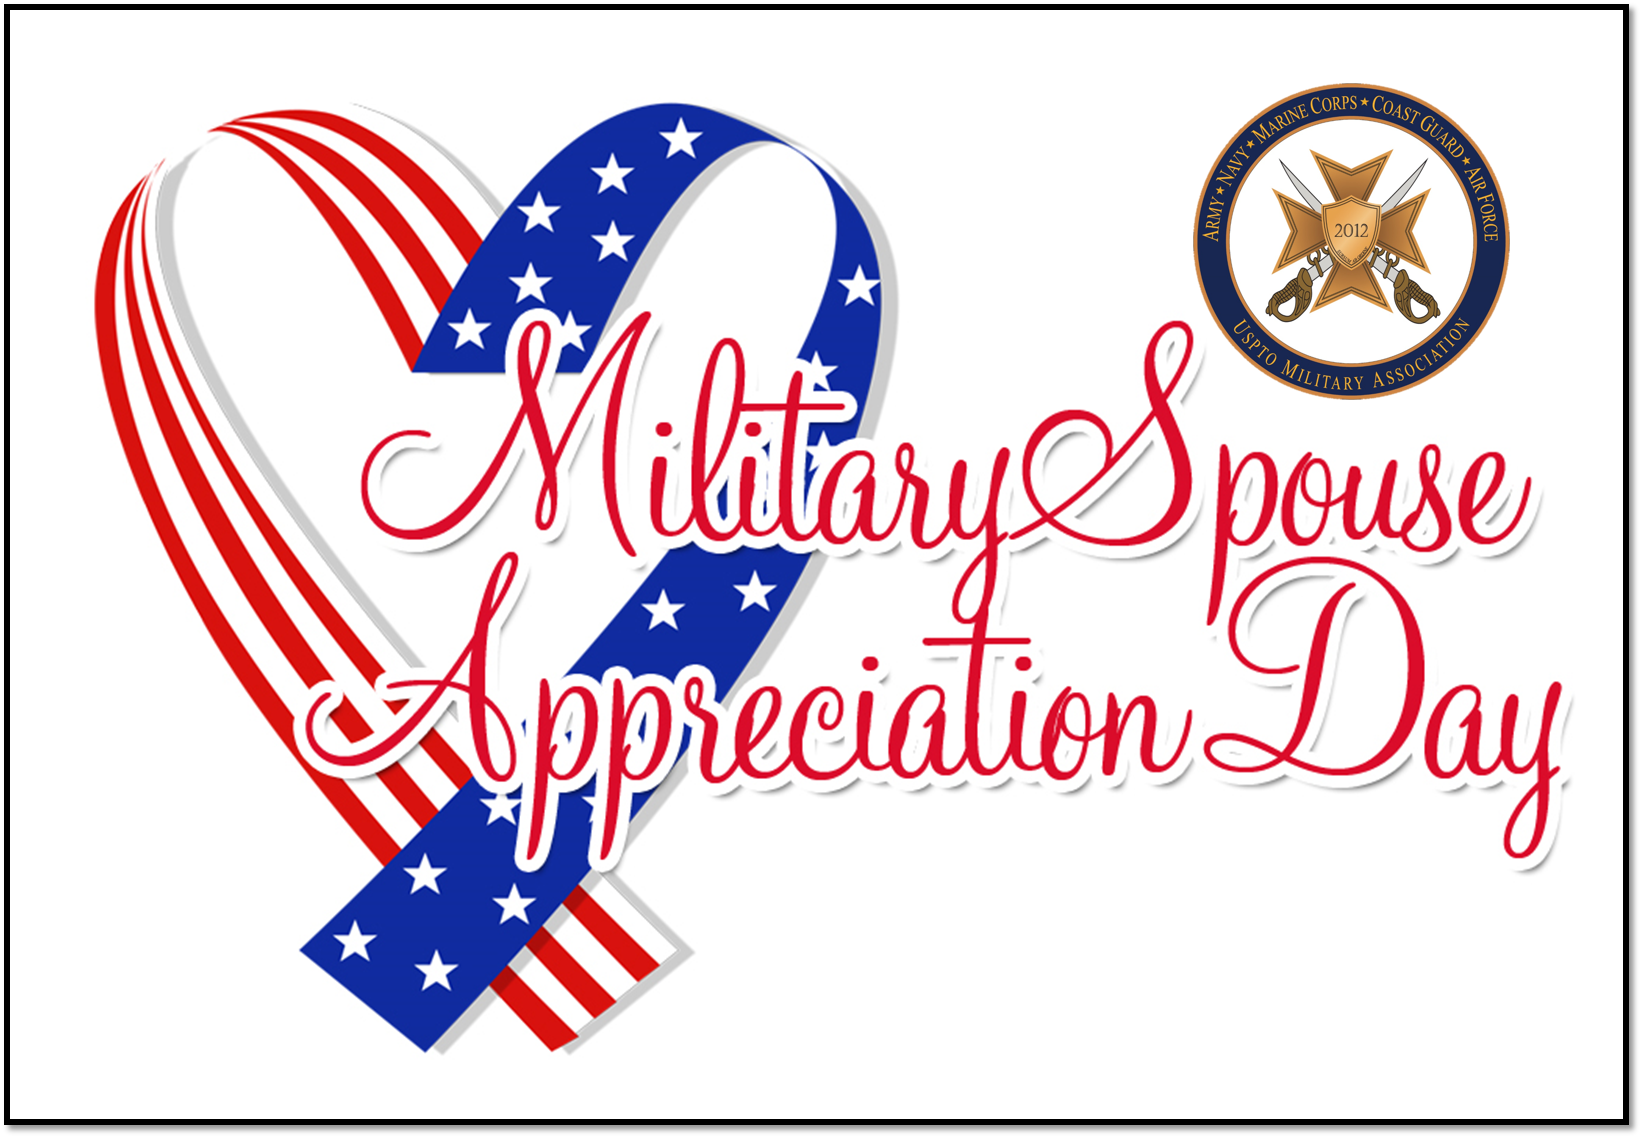 May 5 is USPTO Military Spouse Appreciation Day